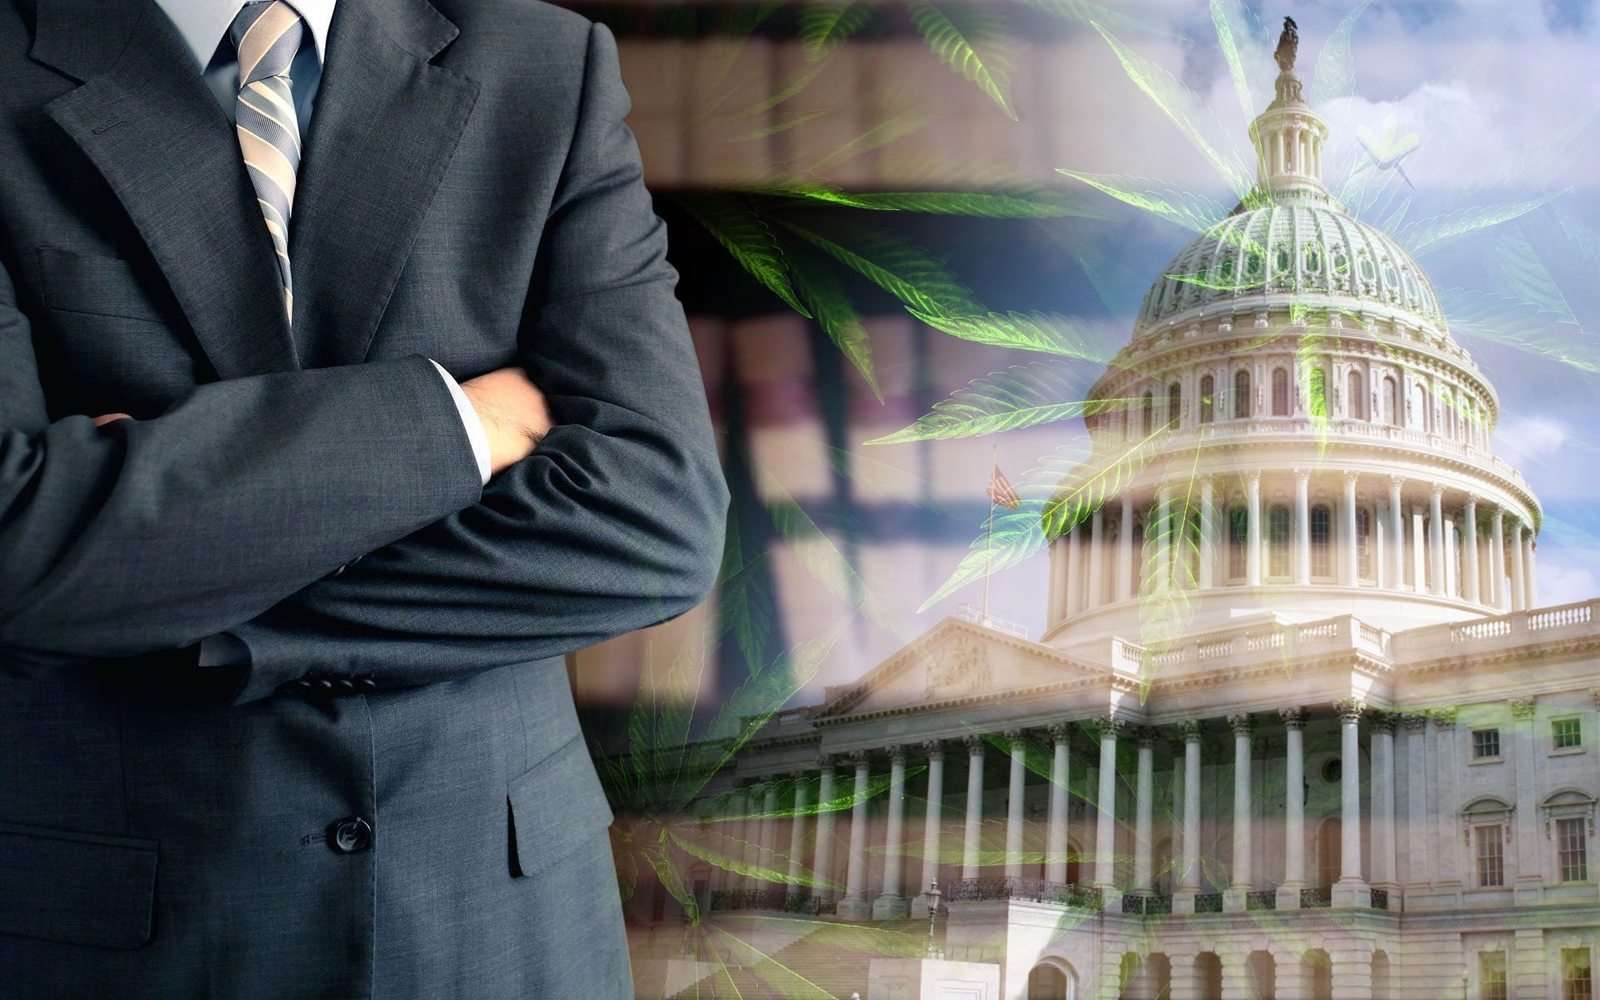 Bipartisan Group Calls For an End to Cannabis Prohibition